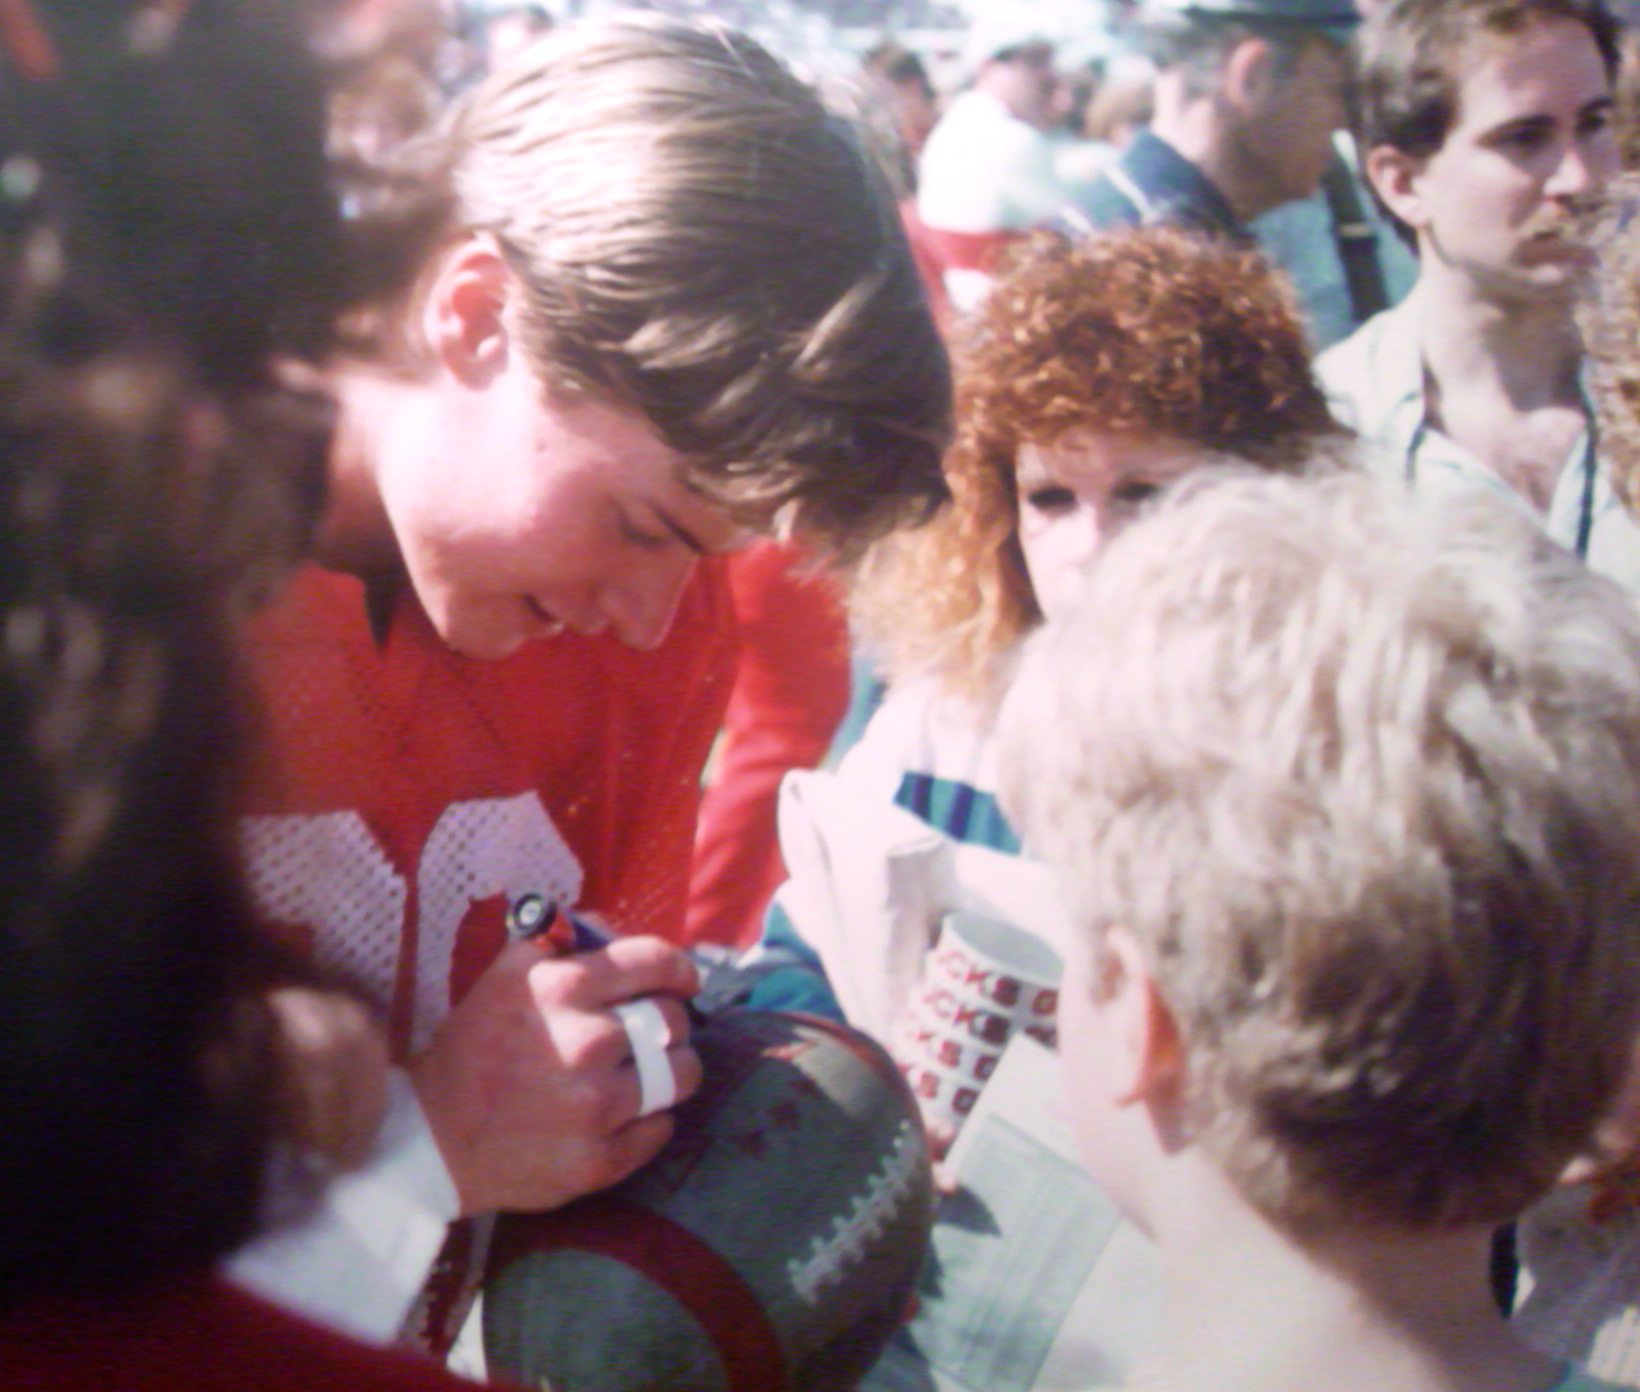 Autographing football 1988 color corrected